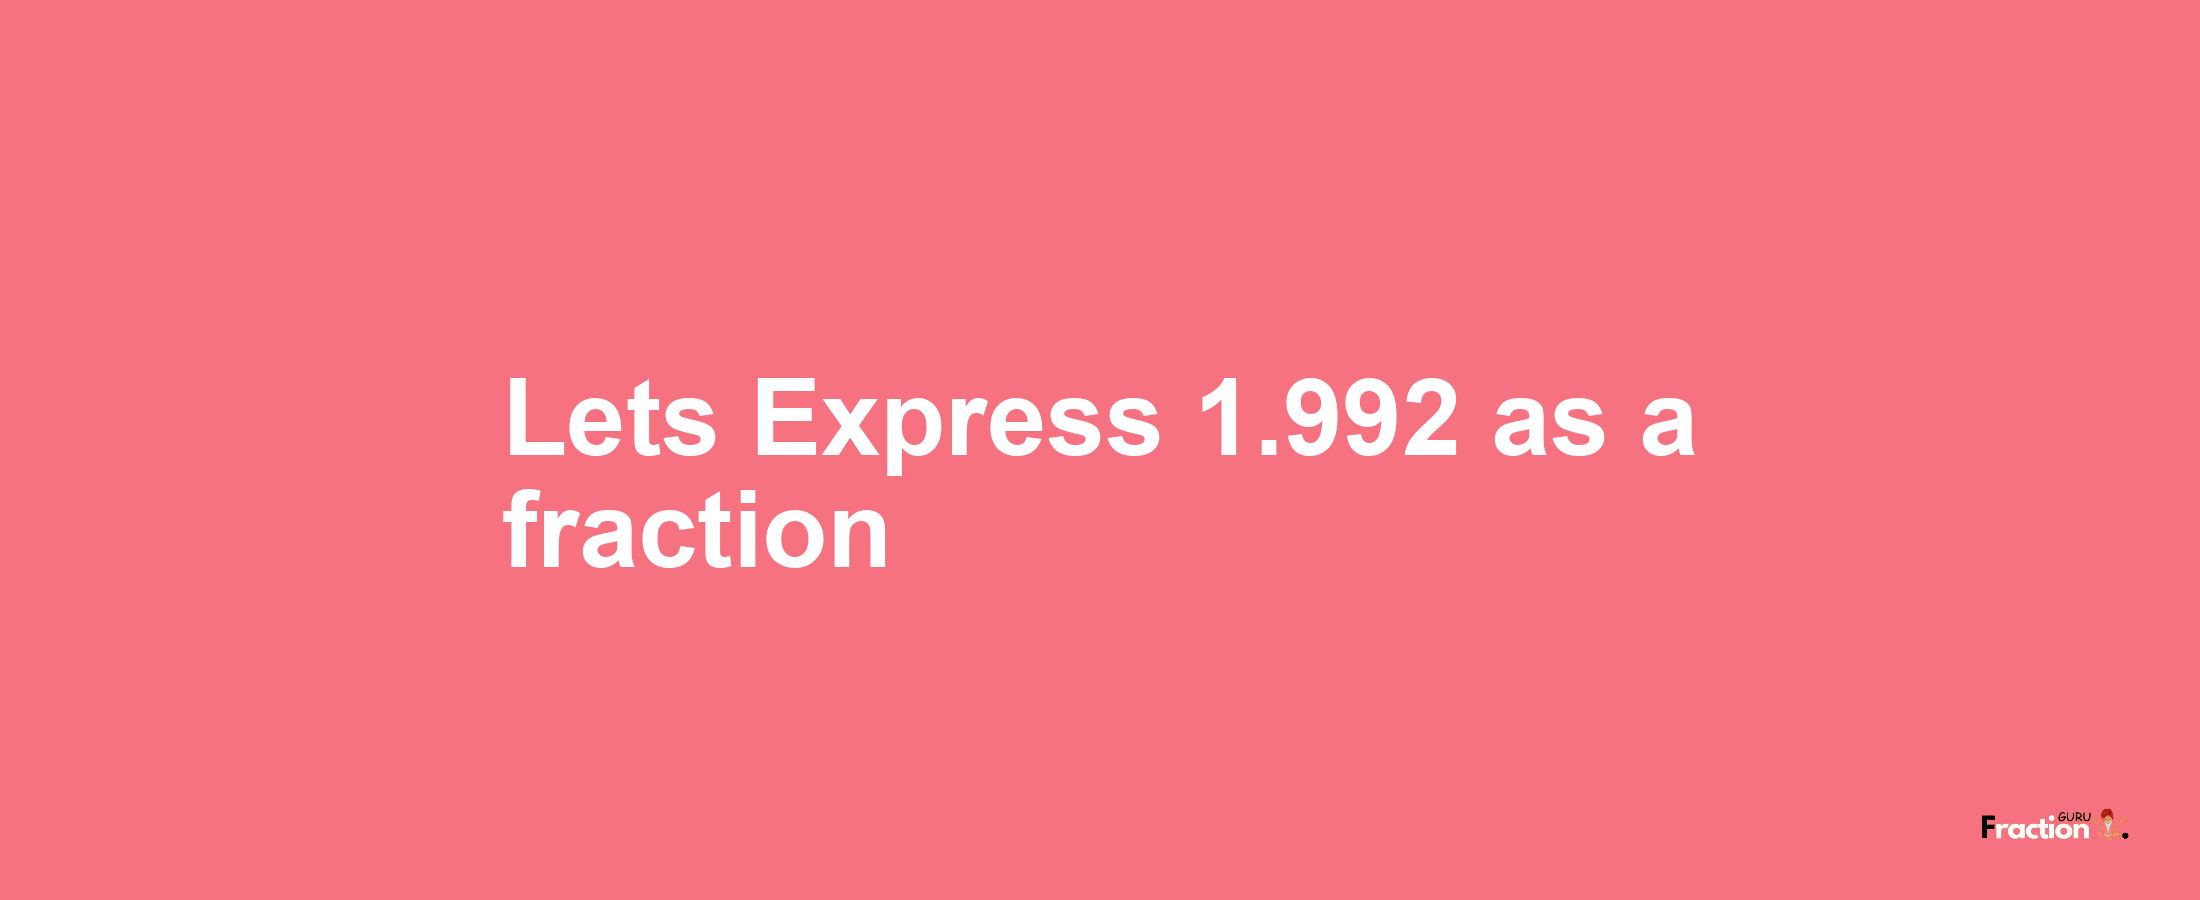 Lets Express 1.992 as afraction